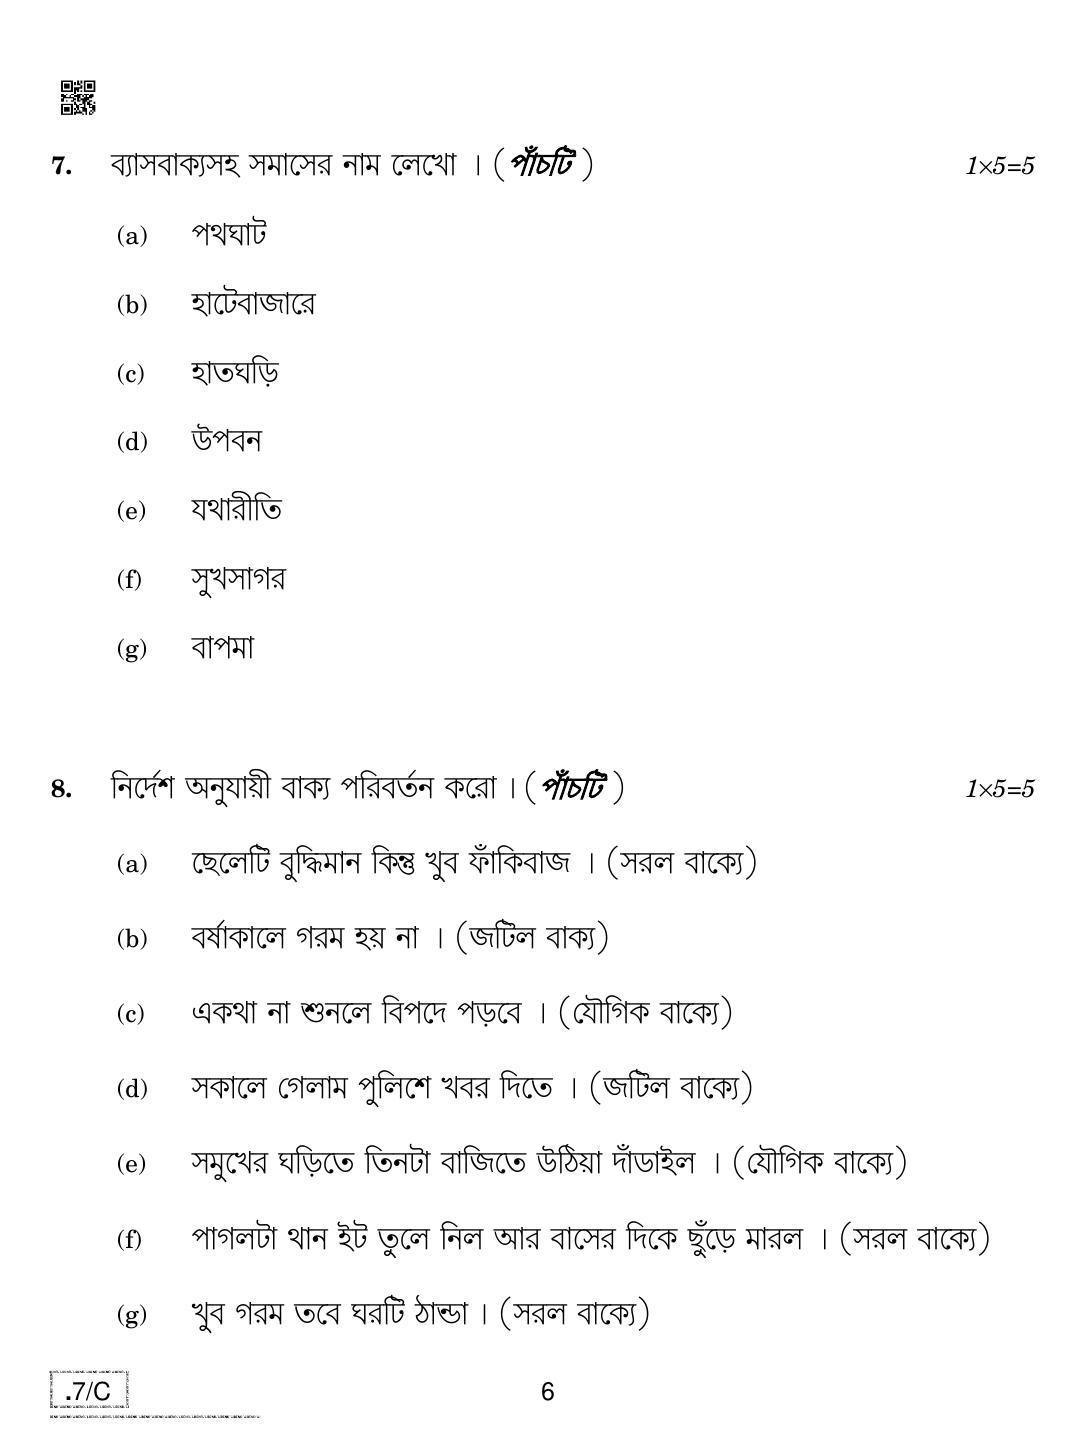 CBSE Class 10 Bengali 2020 Compartment Question Paper - Page 6